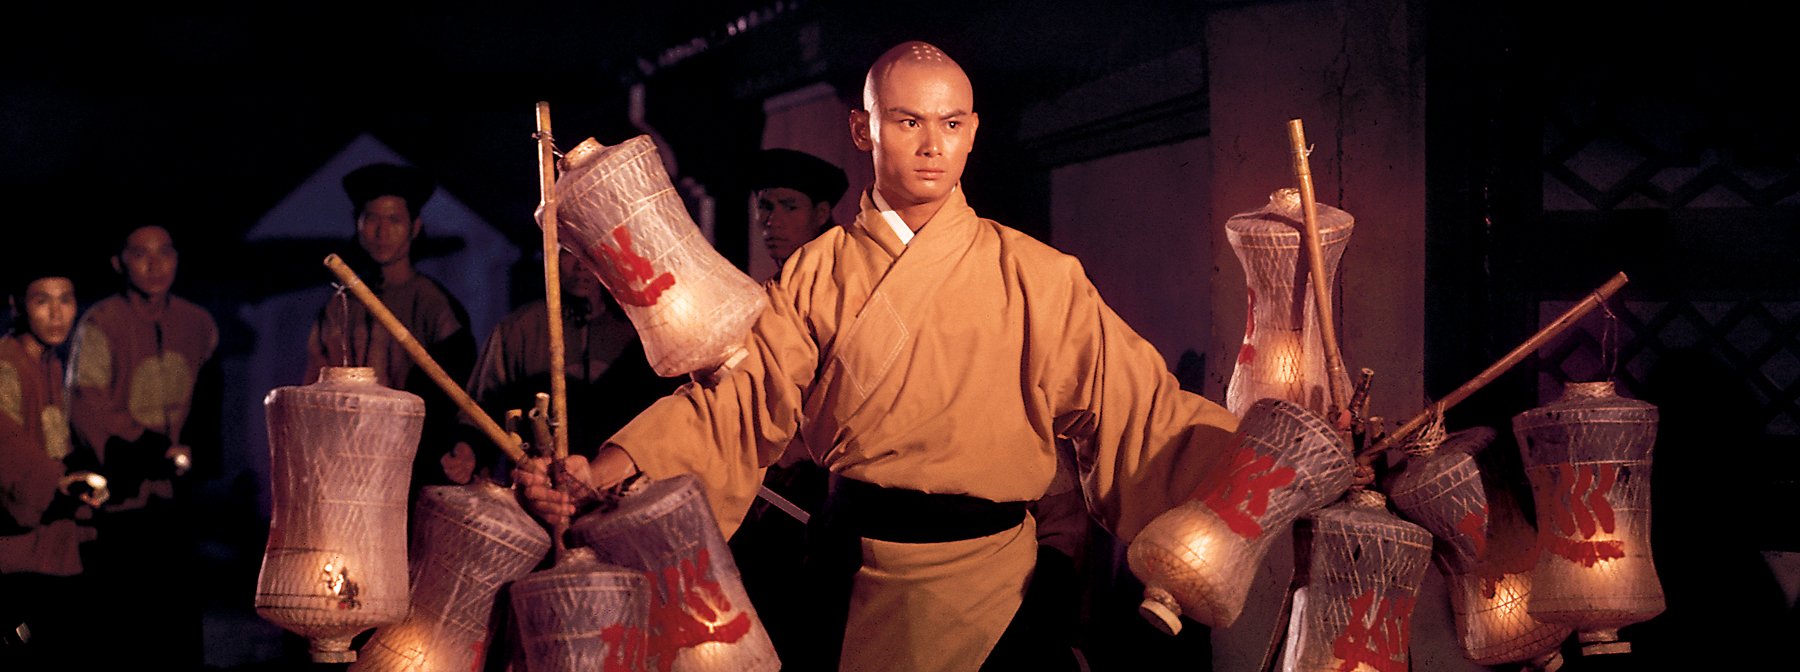 Inside the 36th Chamber – Re-Visiting Shaw Brothers’ Timeless Trilogy